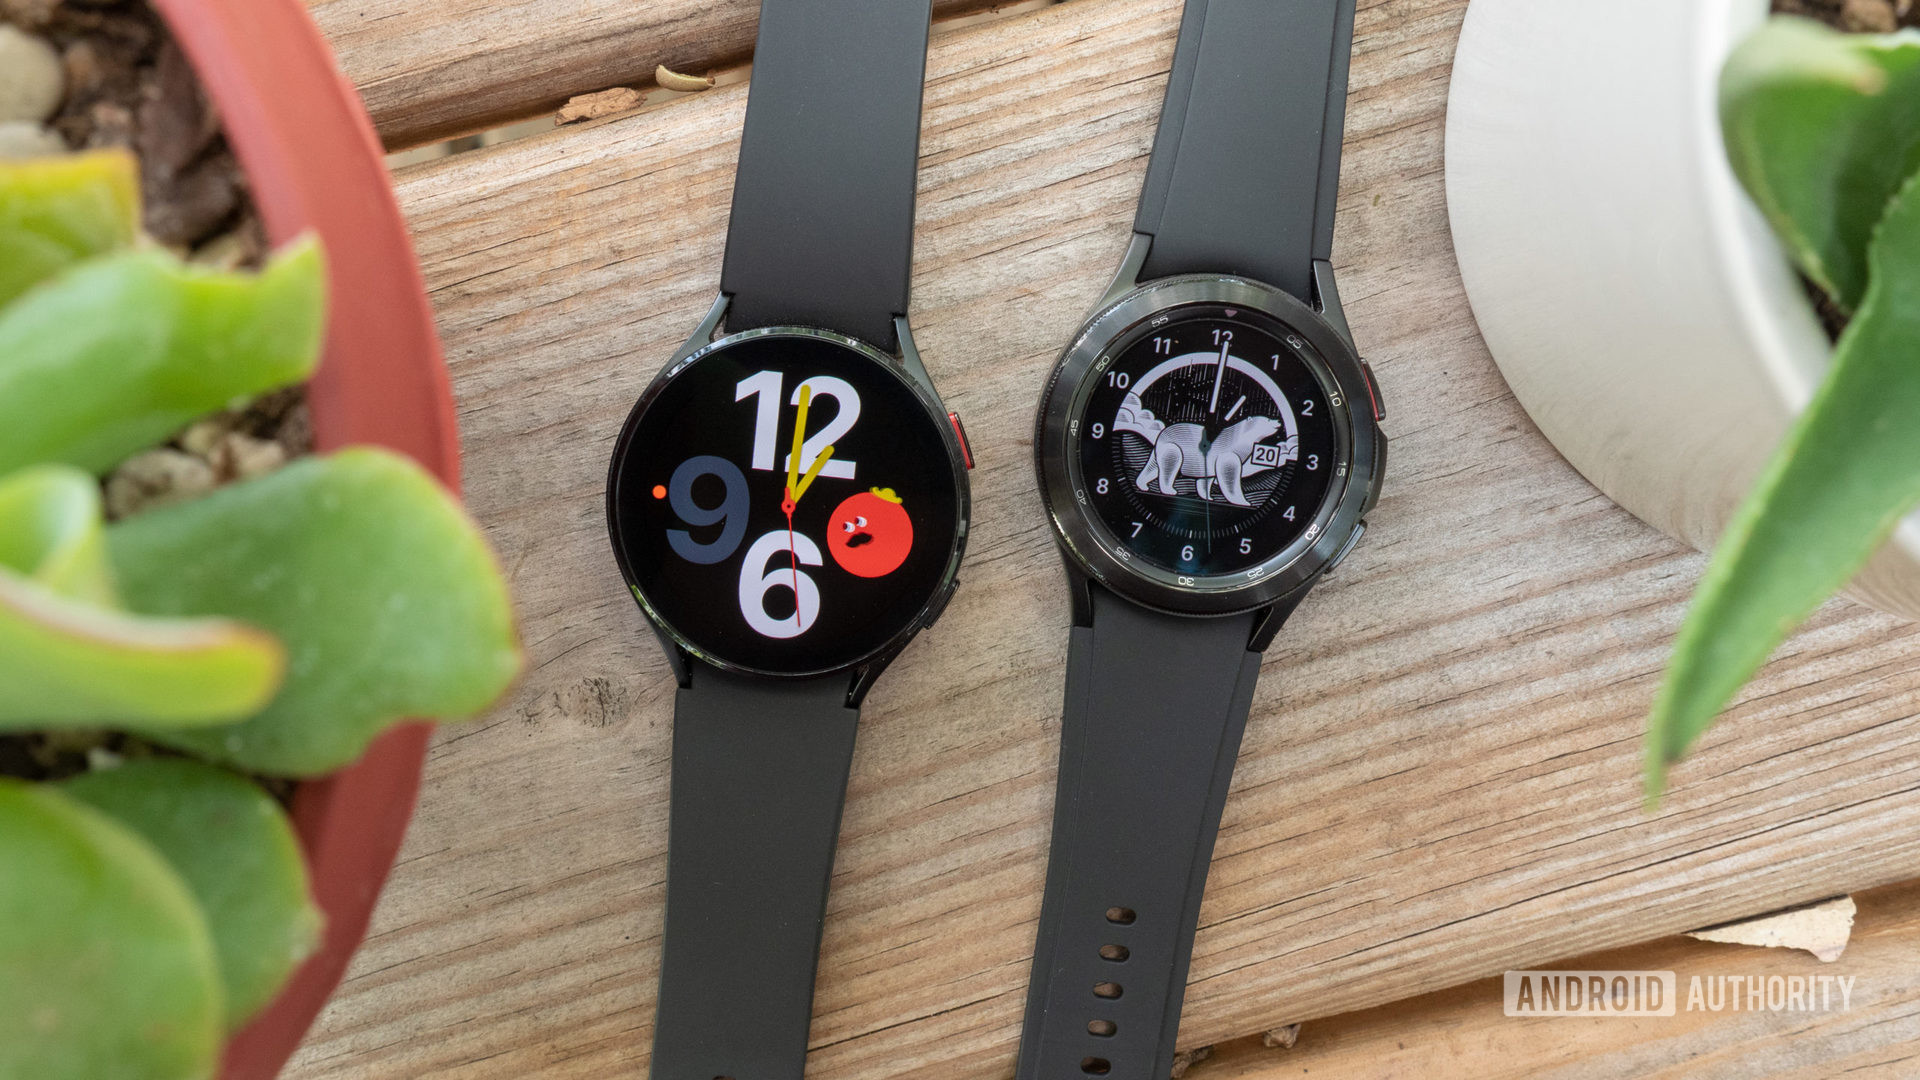 The Samsung Galaxy Watch 4 and Samsung Galaxy Watch 4 Classic on a table.